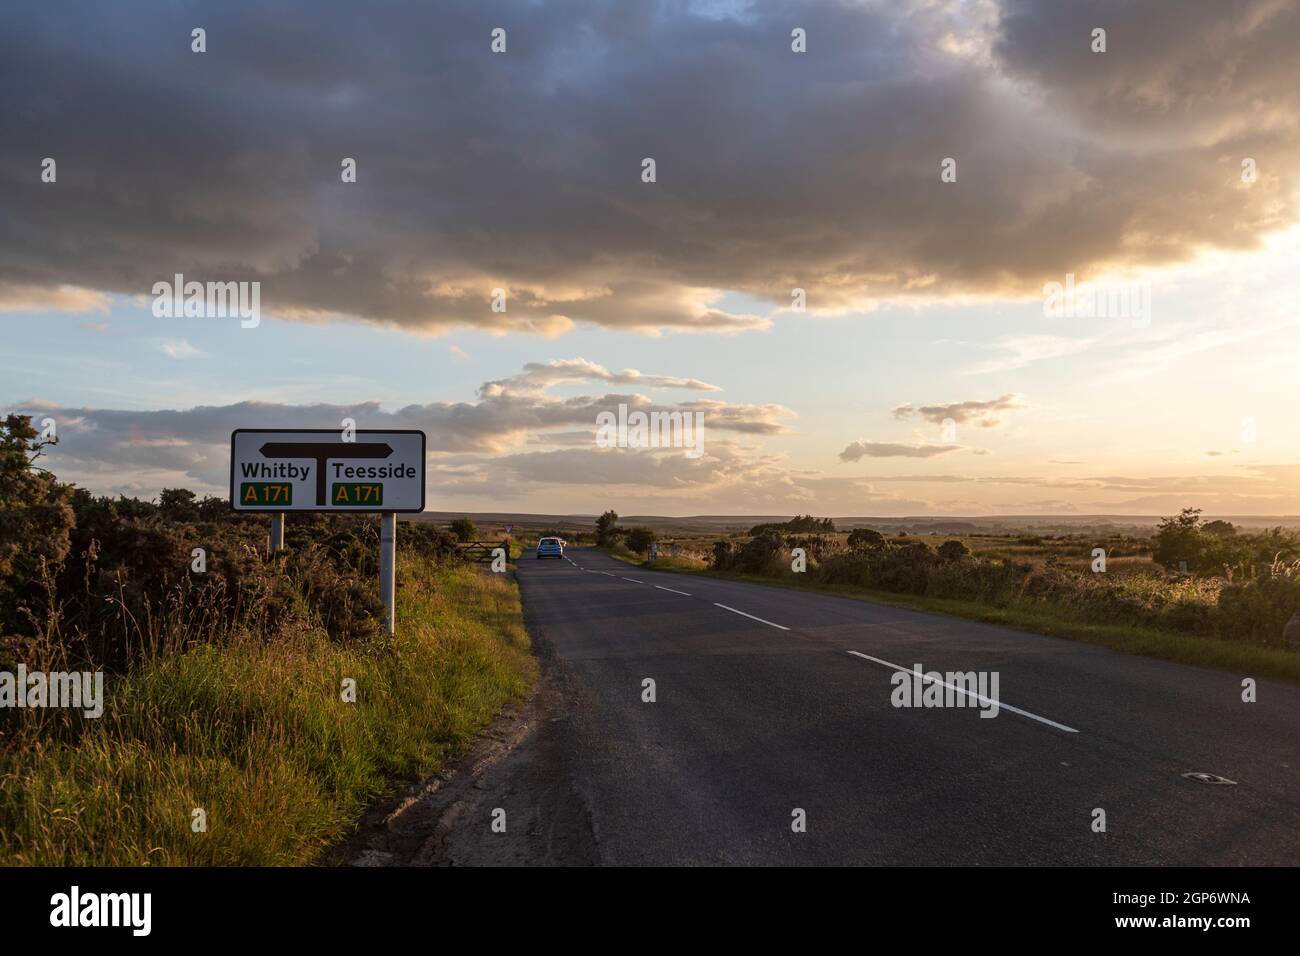 A171 road sing to Whitby and Teesside, Landscape near Whitby, North Yorkshire, England, UK Stock Photo